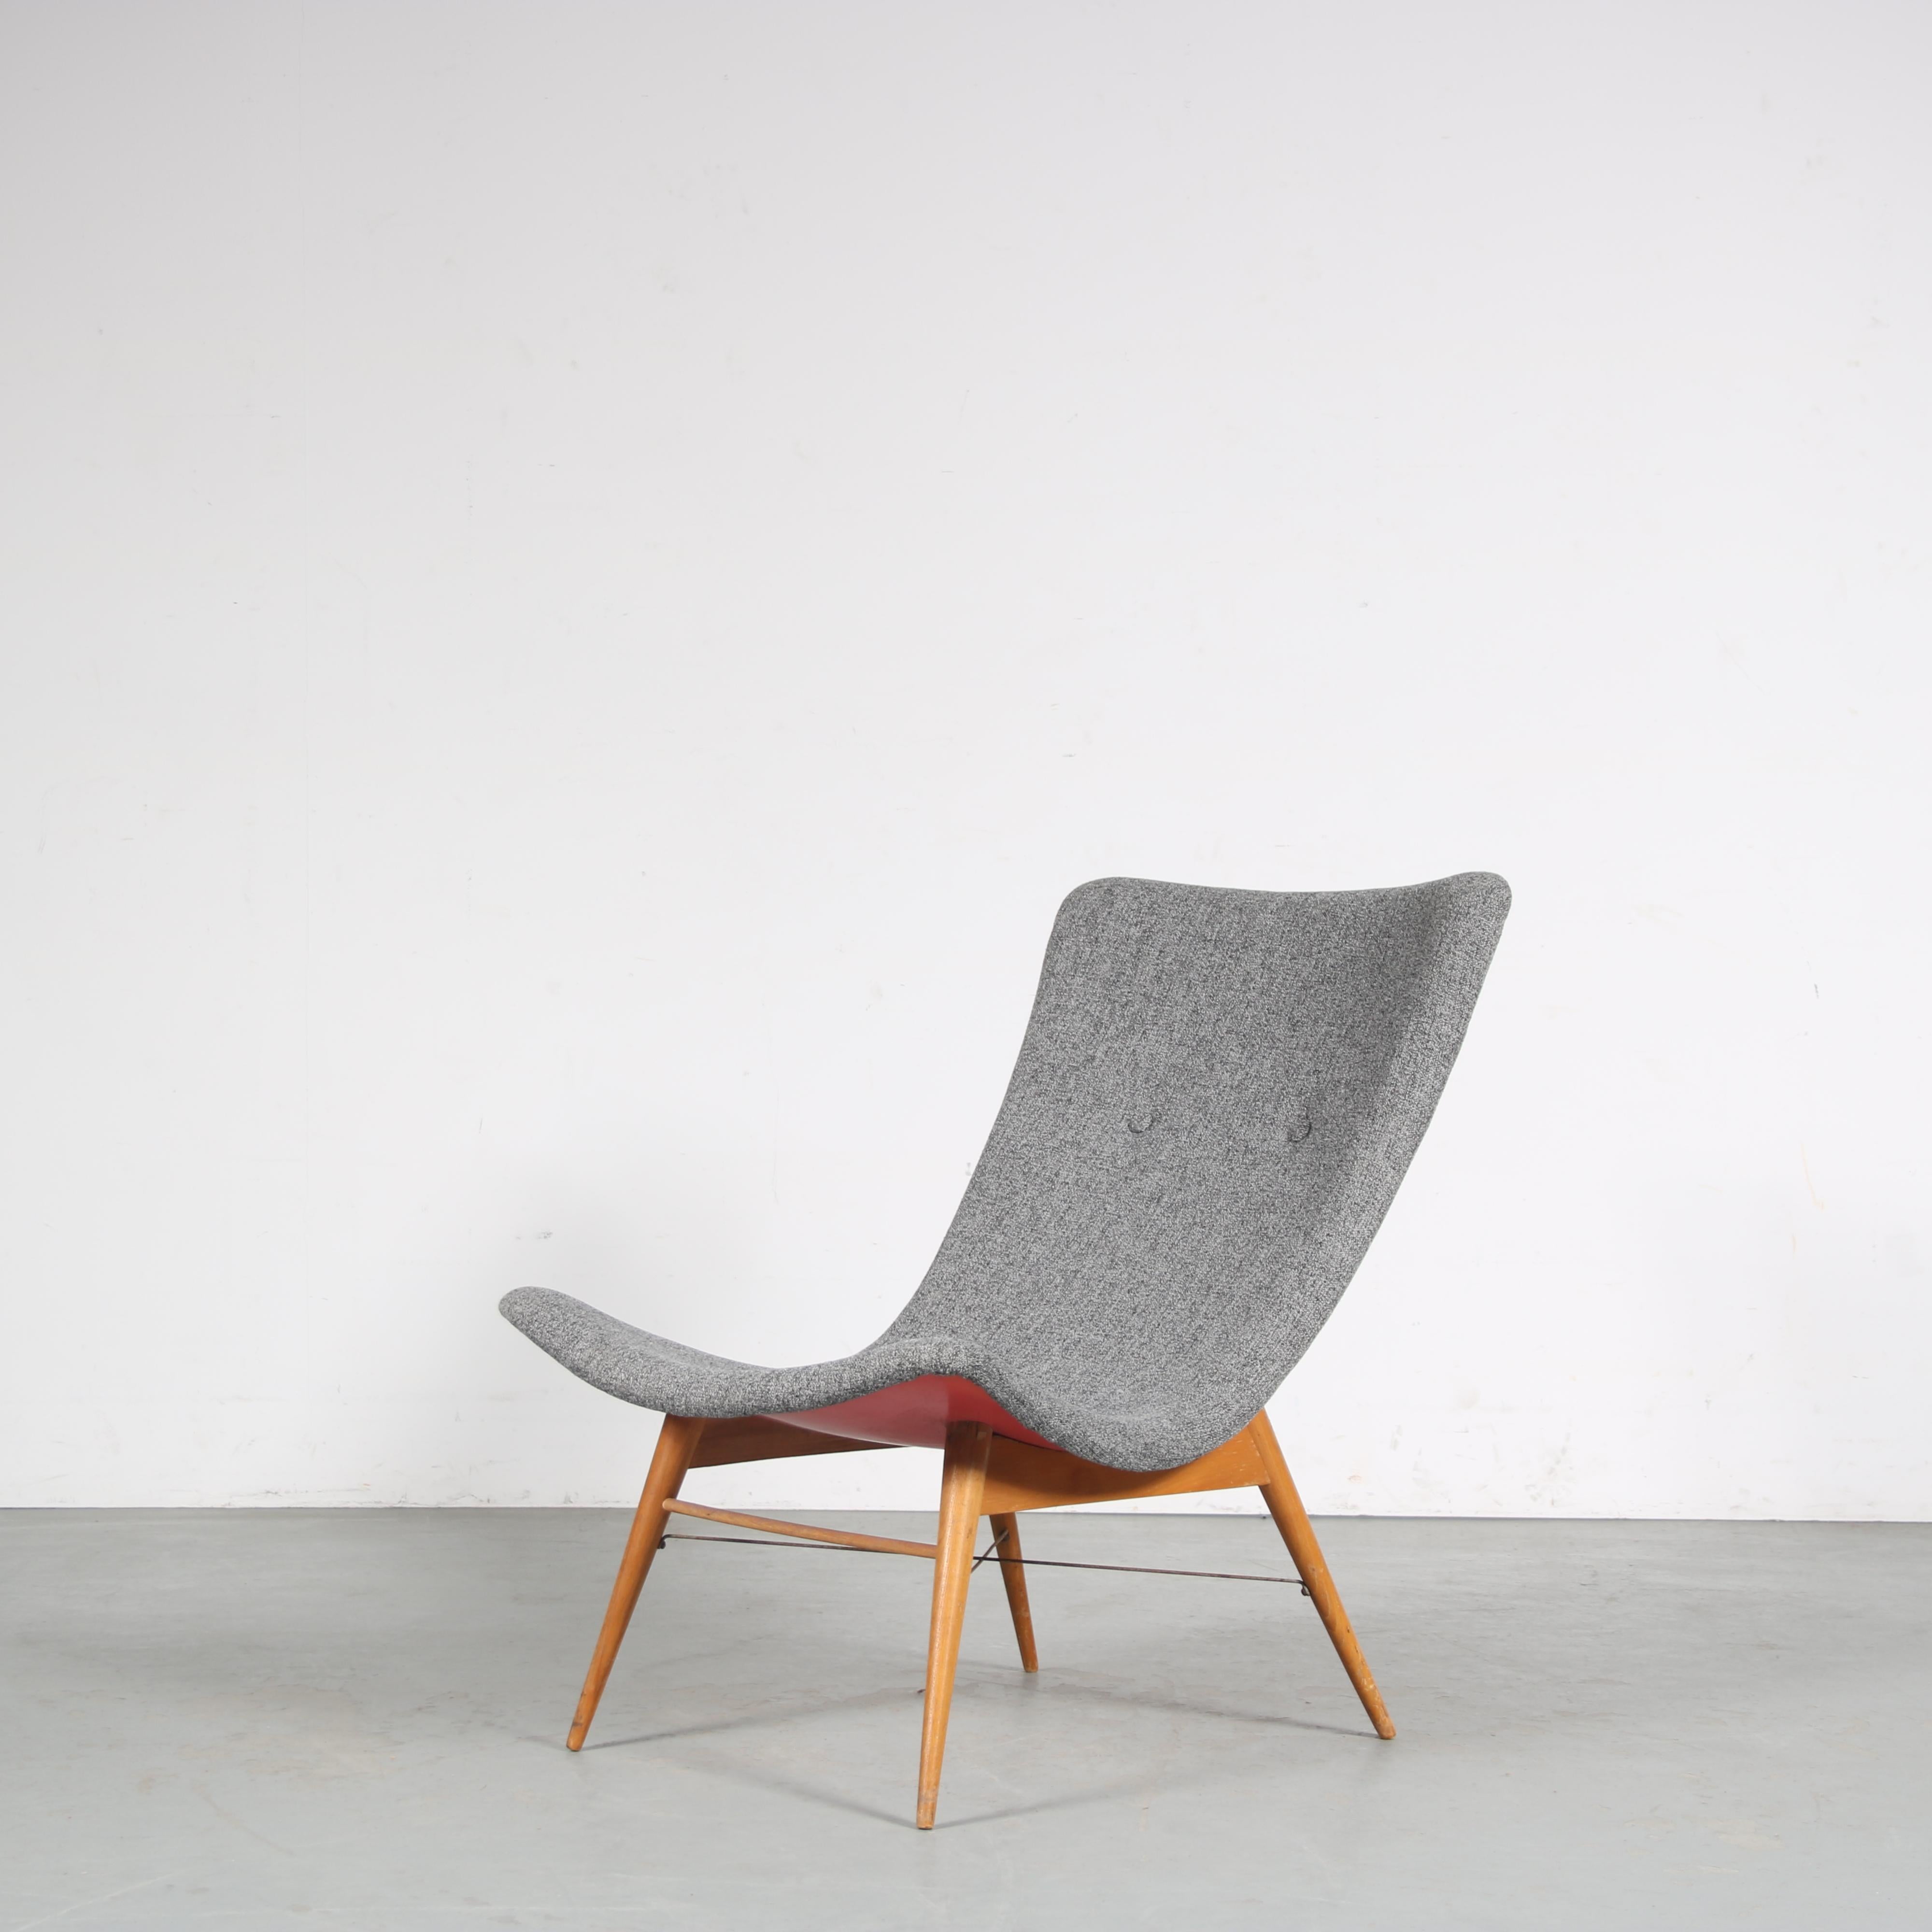 A lovely lounge chair, designed by Miroslav Navratil and manufactured by Ceský Nábytek in the Czech Republic in 1959.

This iconic piece was designed for the famous Triennale di Milano exhibition in Italy. It is a beautiful, elegant piece of